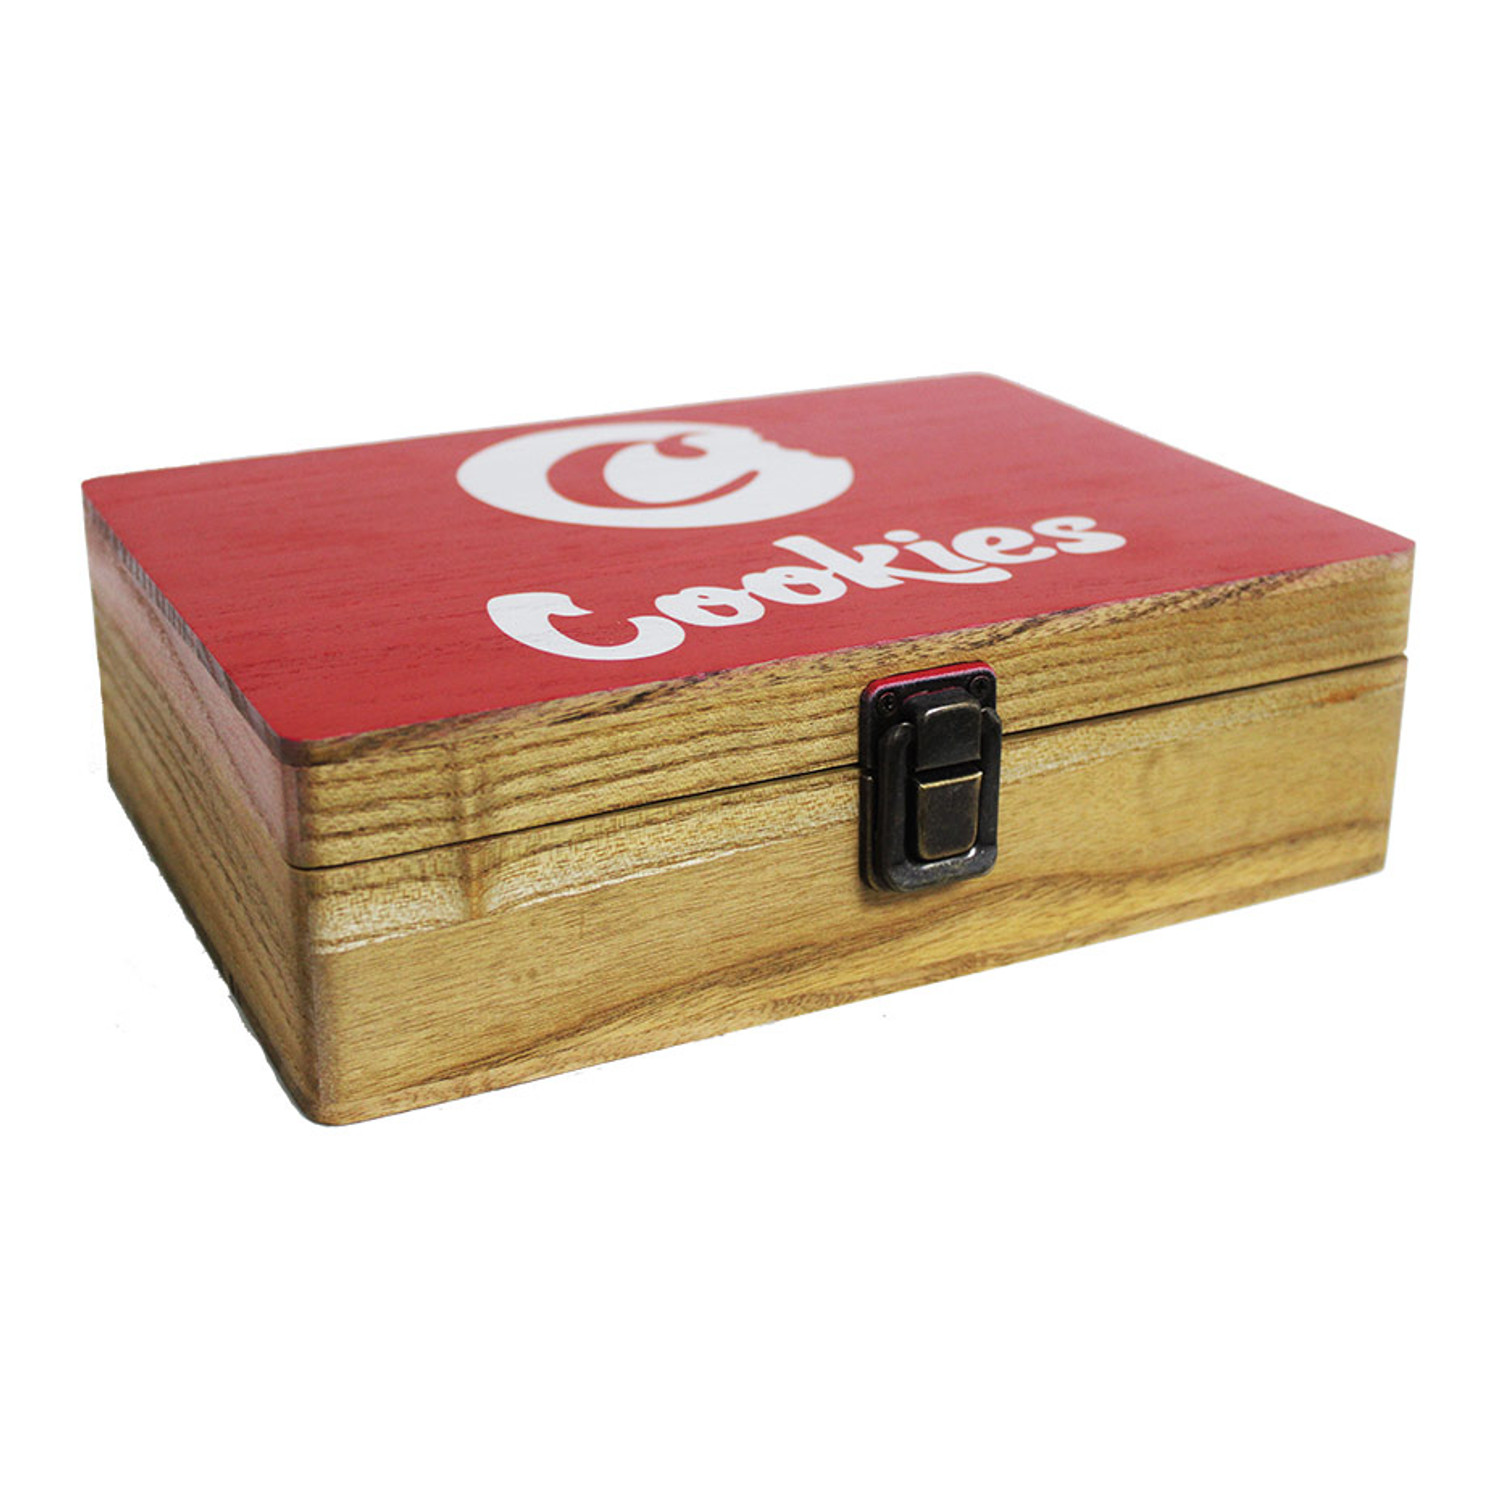 Best Prices For BAMBOO LARGE STASH BOX WITH ACCESSORIES INCLUDED